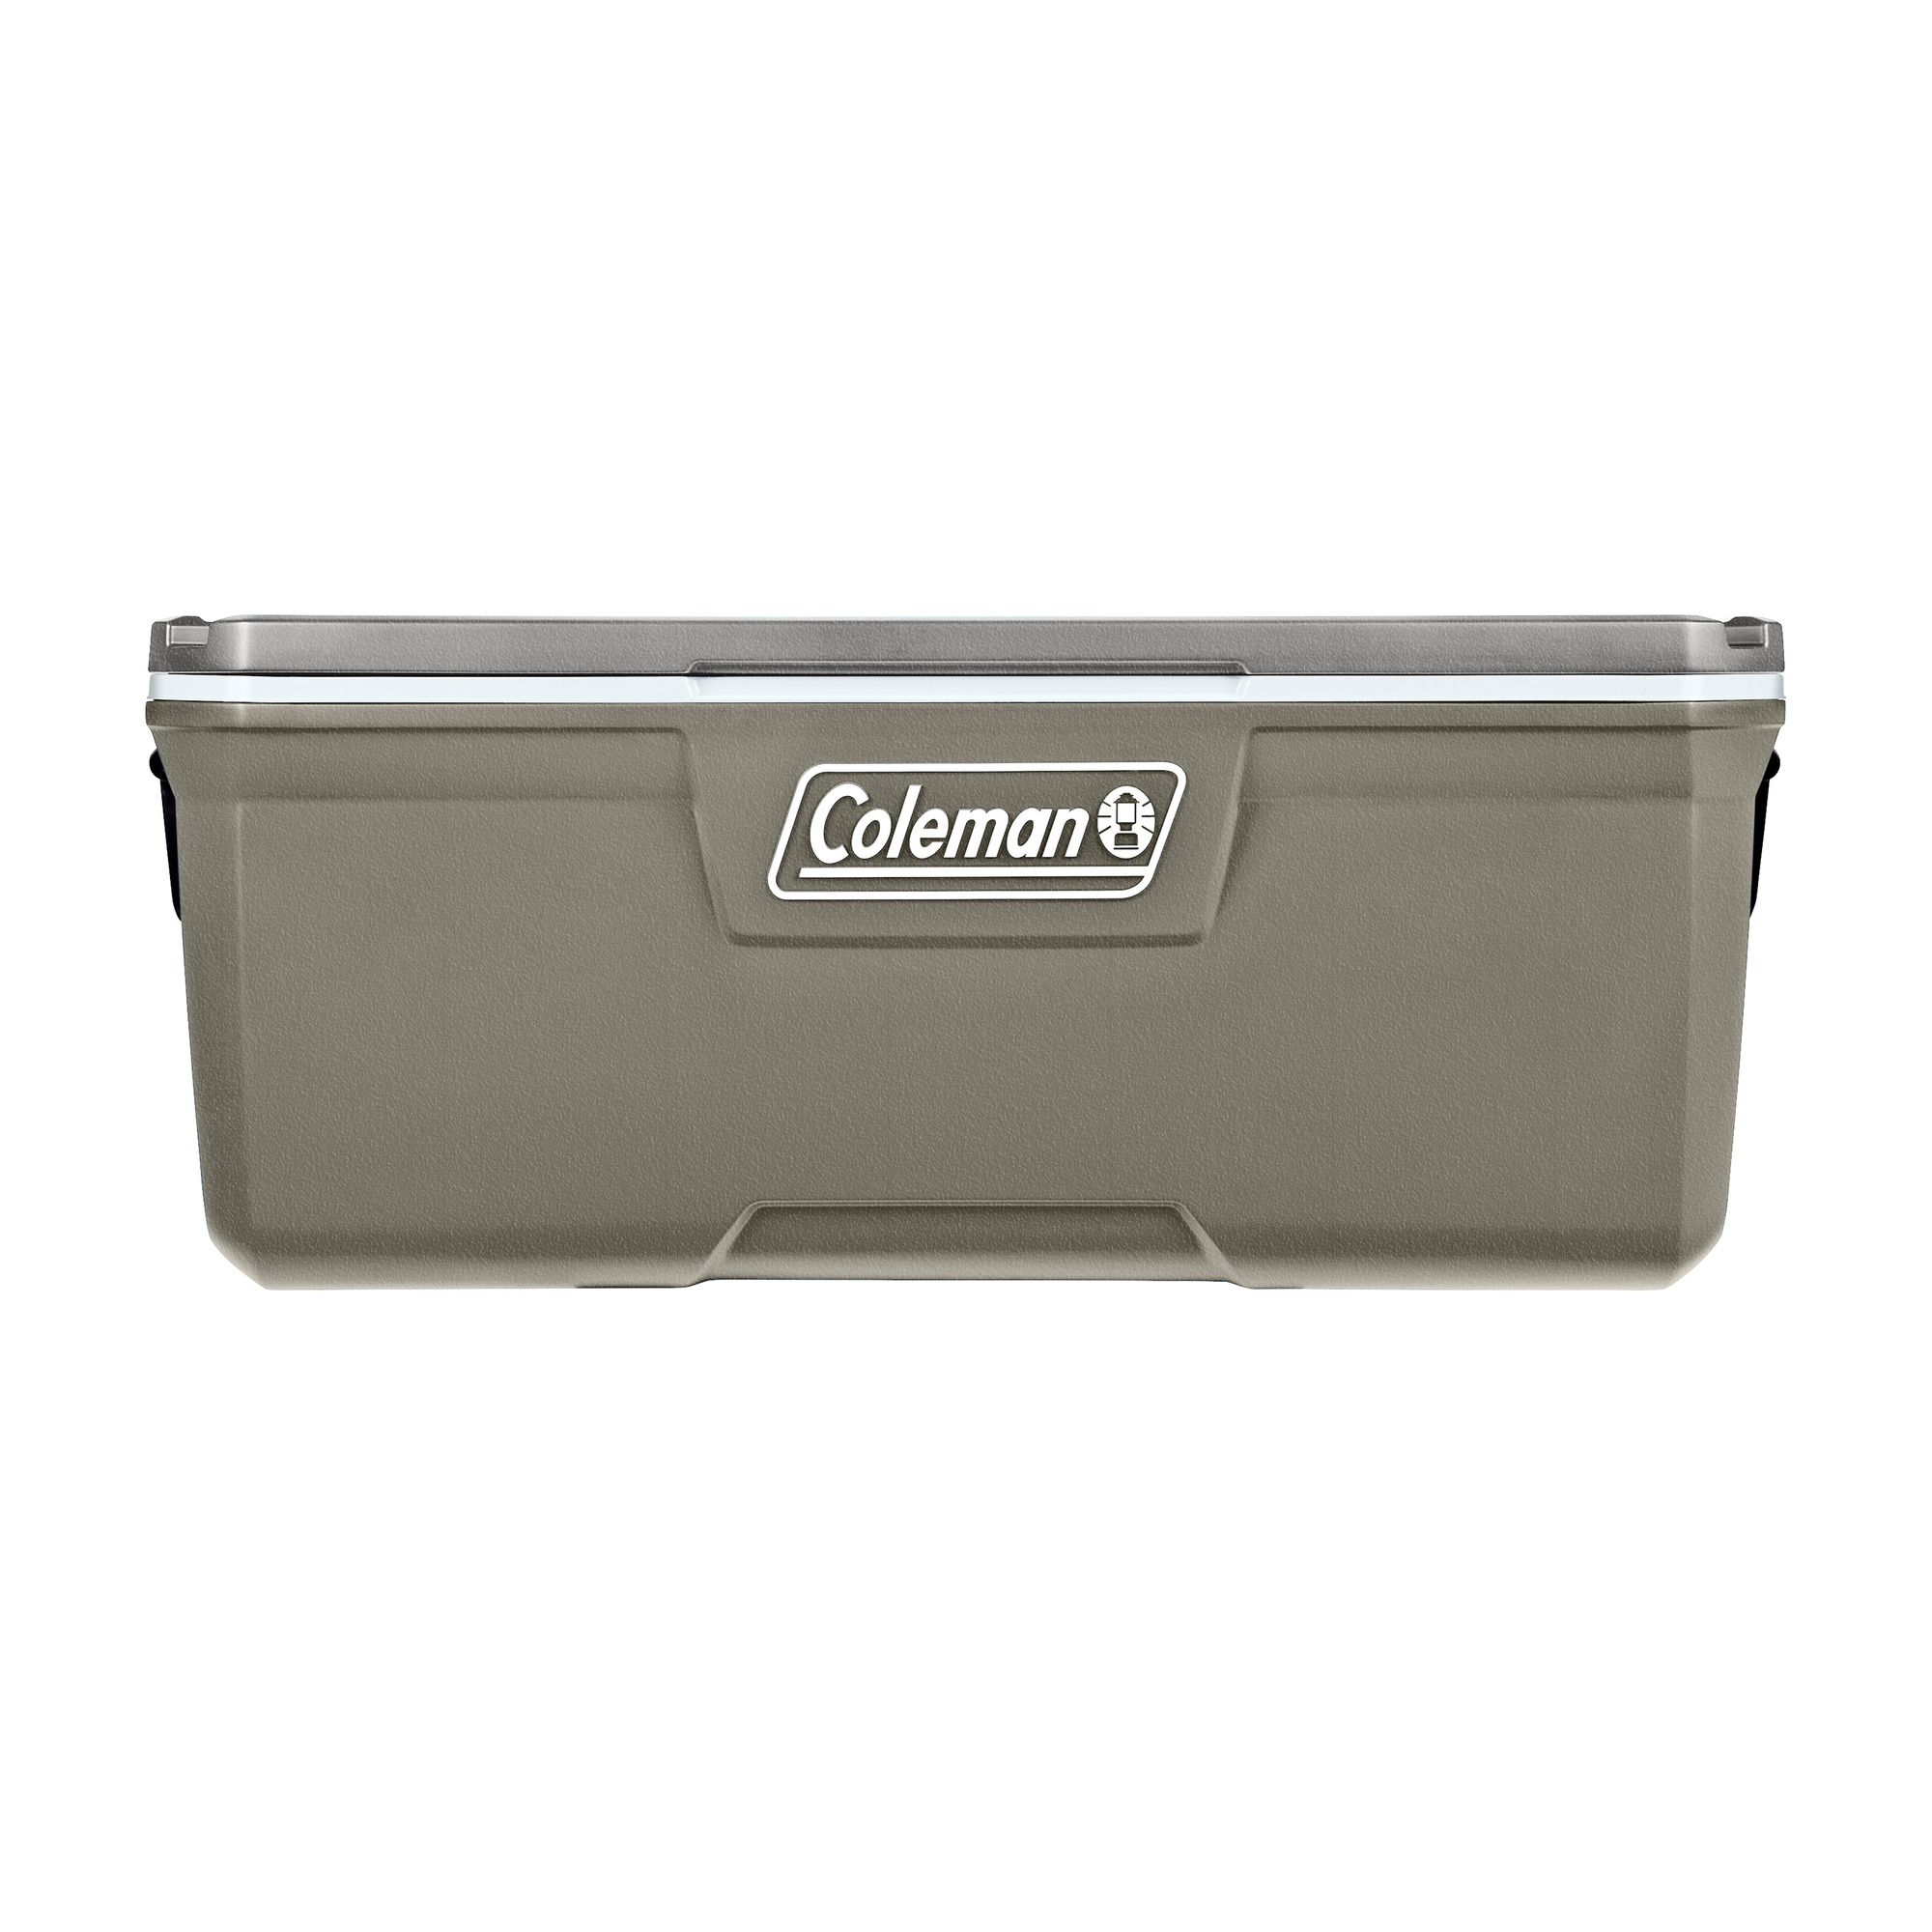 Coleman 316 Series 120QT Hard Chest Cooler, Silver Ash - image 1 of 9